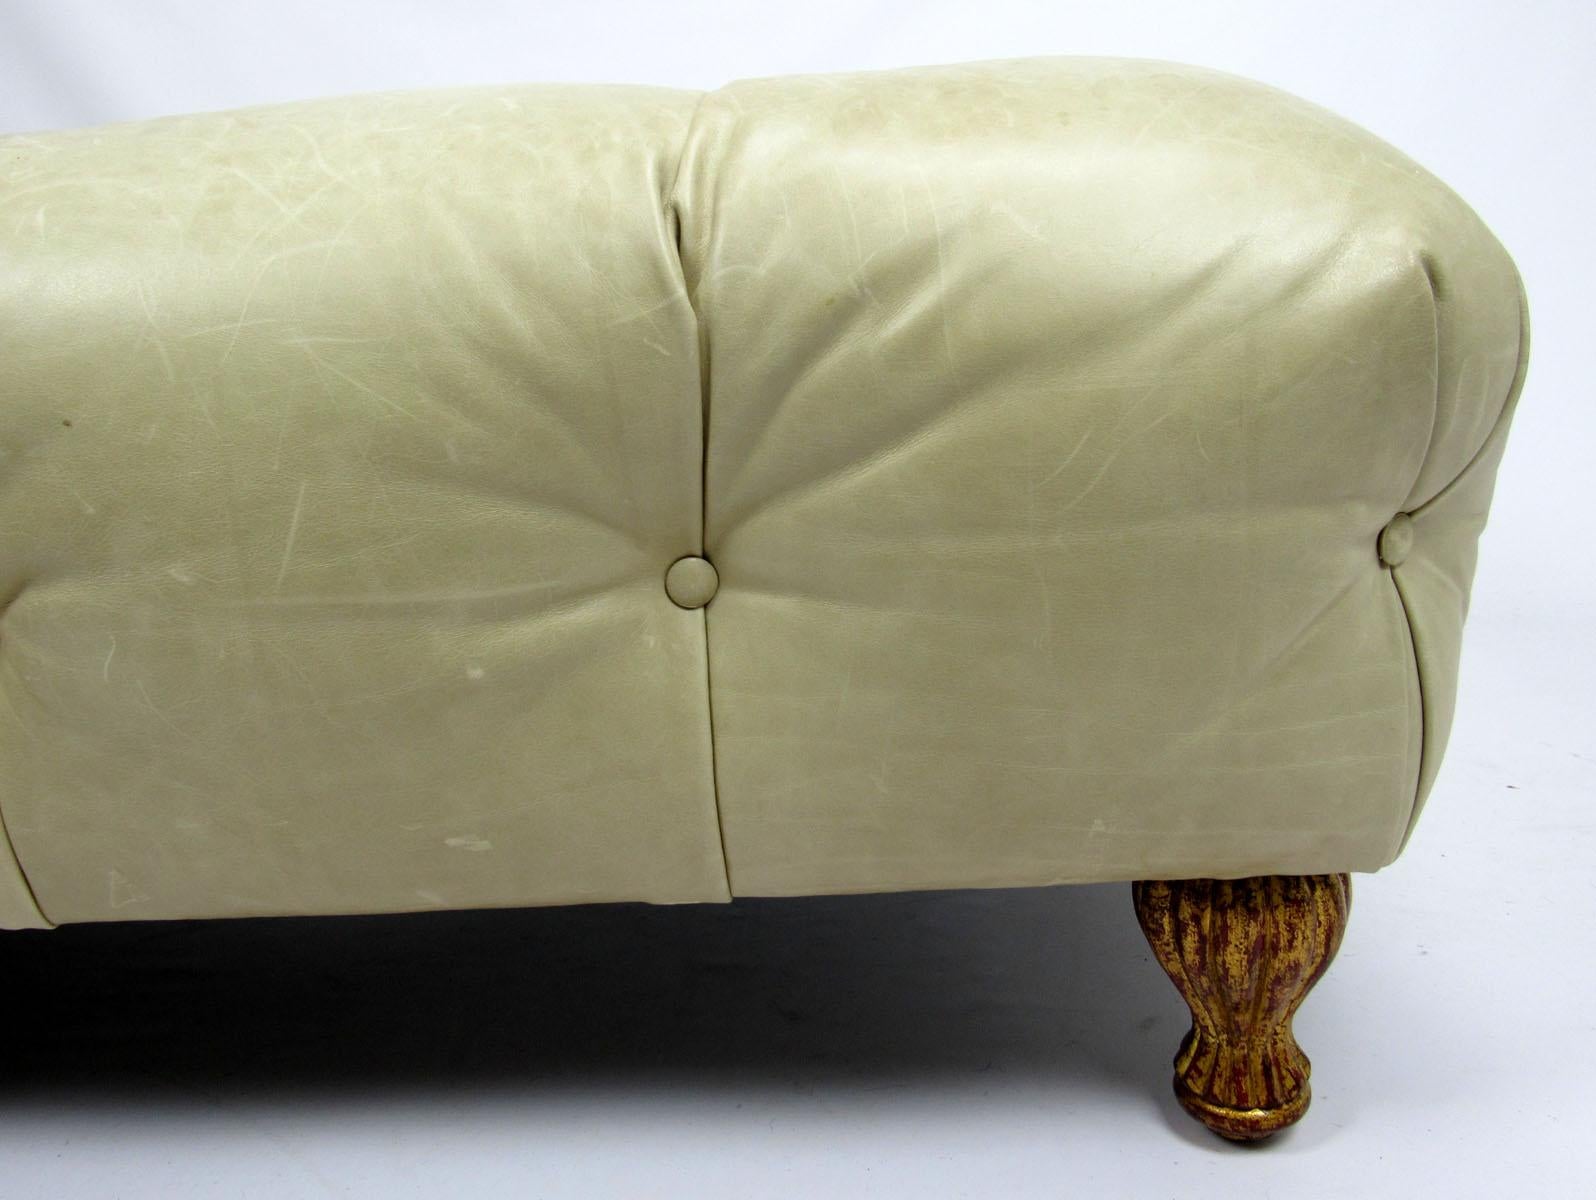 Late 20th Century Leather Ottoman In Good Condition For Sale In Dallas, TX